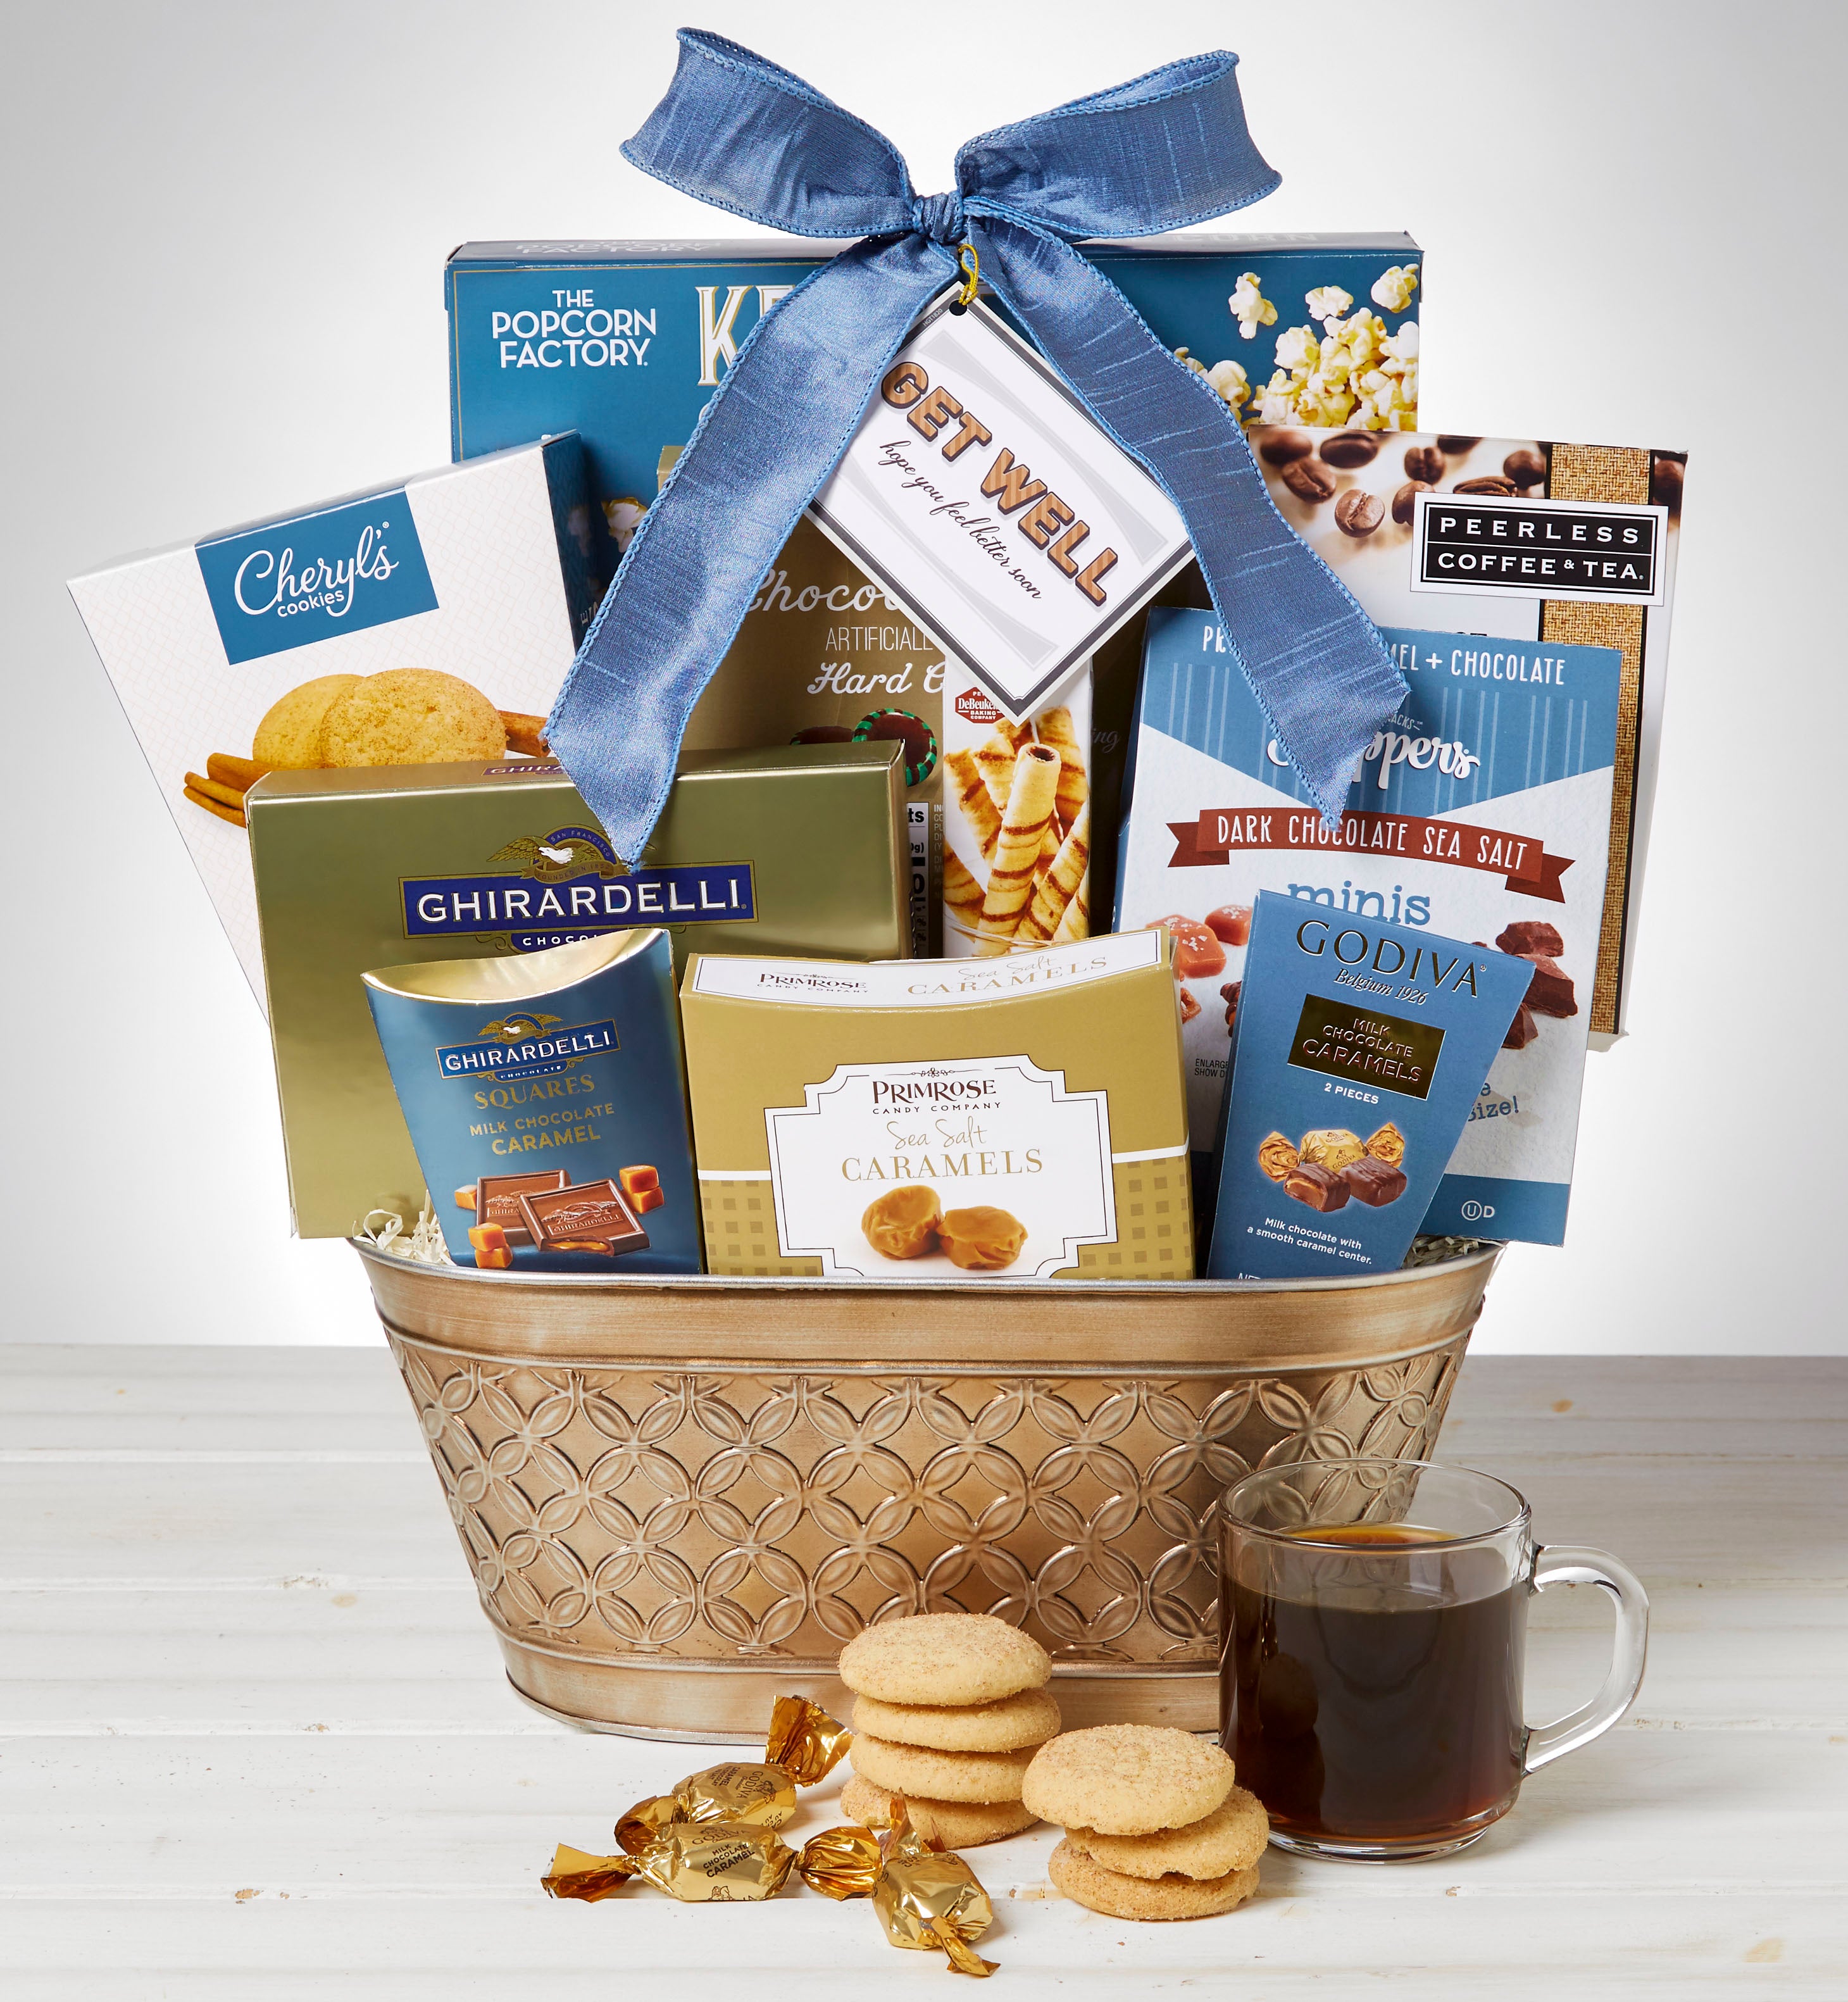 Get Well Soon! Healing Thoughts Gift Basket